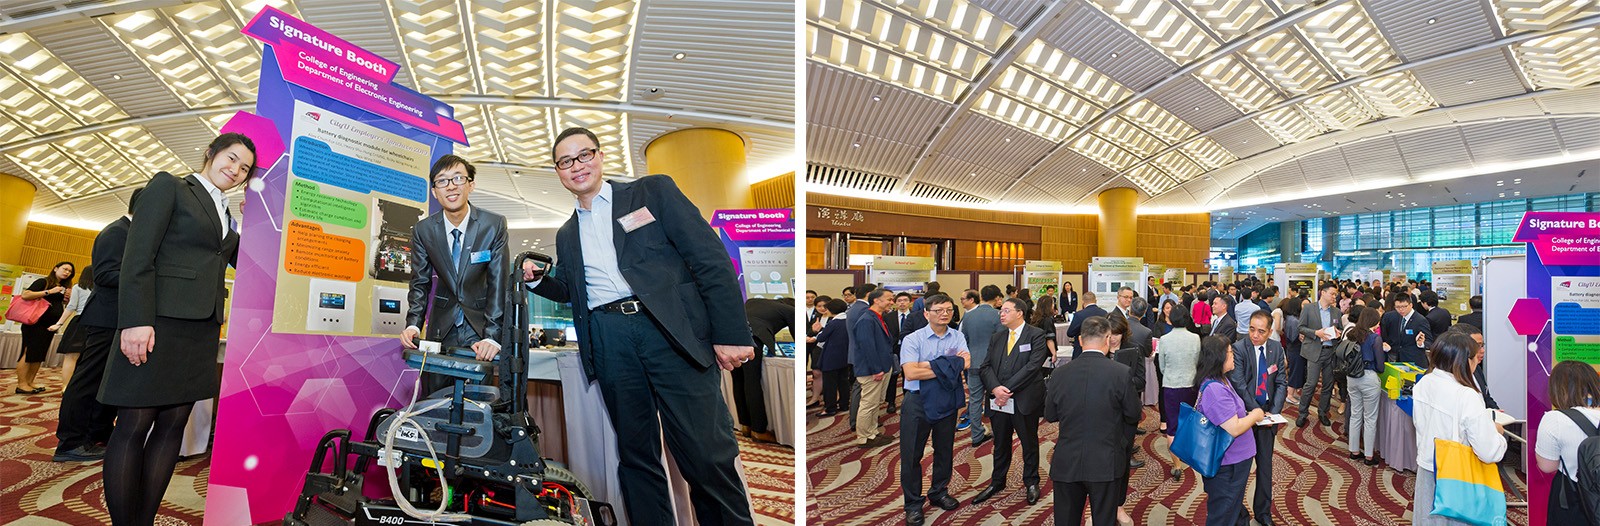 Students showcased their projects to employers before the luncheon. In the photo on the left, students and Professor Henry Chung Shu-hung (right) from Department of Electronic Engineering introduced a device that monitors wheelchair batteries. 